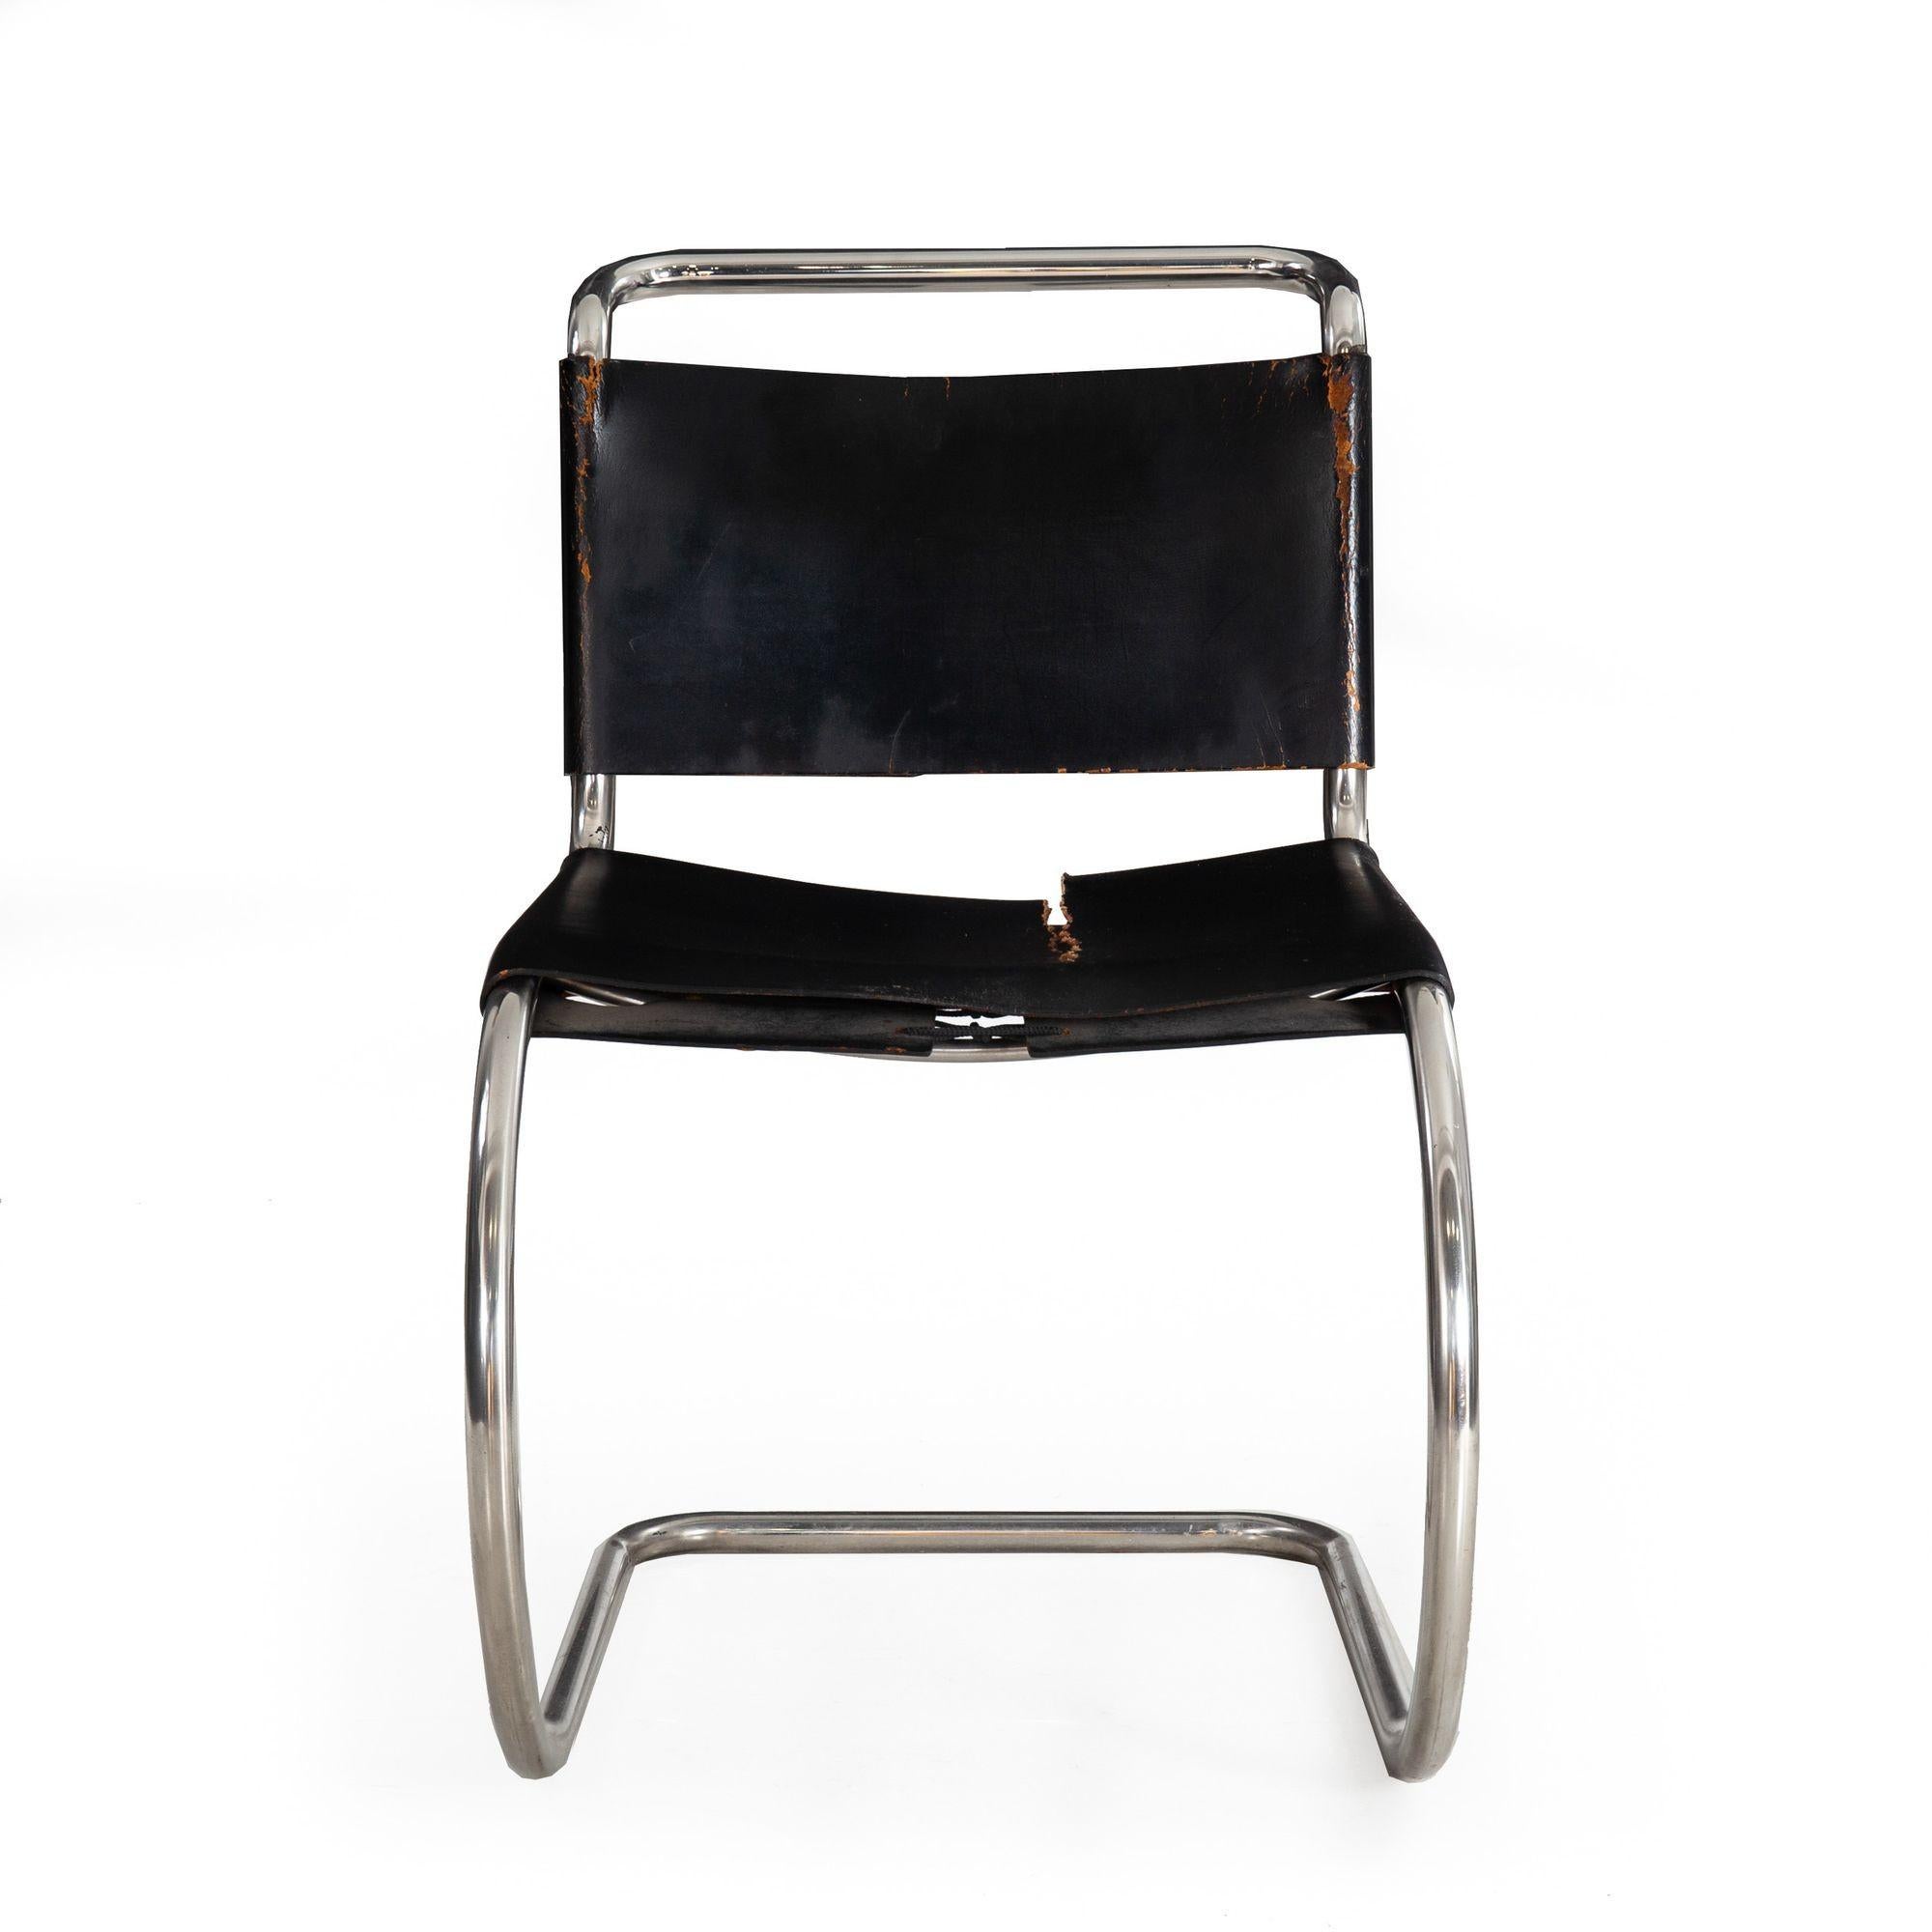 LUDWIG MIES VAN DER ROHE MR10 BLACK LEATHER AND CHROMED STEEL DINING CHAIR Unmarked, circa 1960s
 Item # 209XDH29P-1 

A single example of the iconic MR10 dining chair designed by Ludwig Mies van der Rohe in 1927, it was manufactured during the